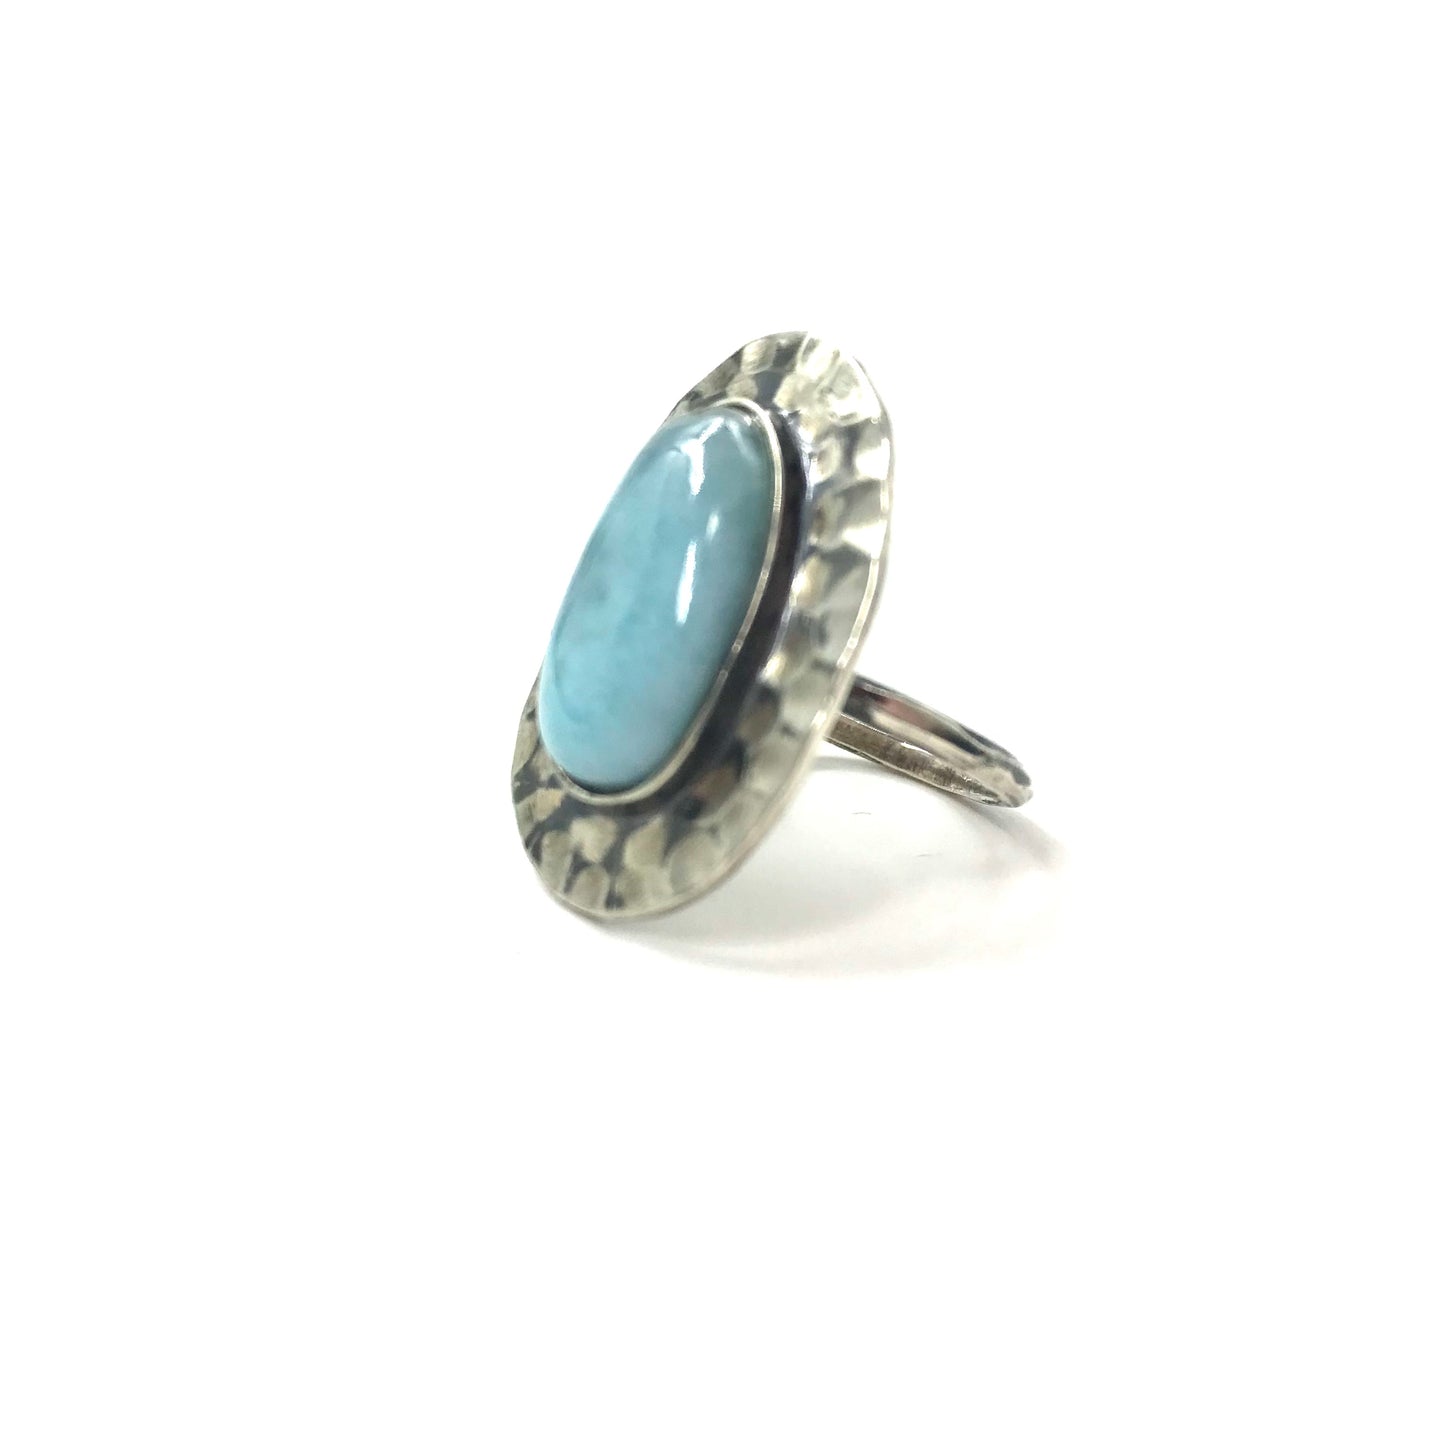 Turquoise Silver Ring オーバル ターコイズ リング 11号 SILVER シルバー 925 槌目 ハンマーワーク